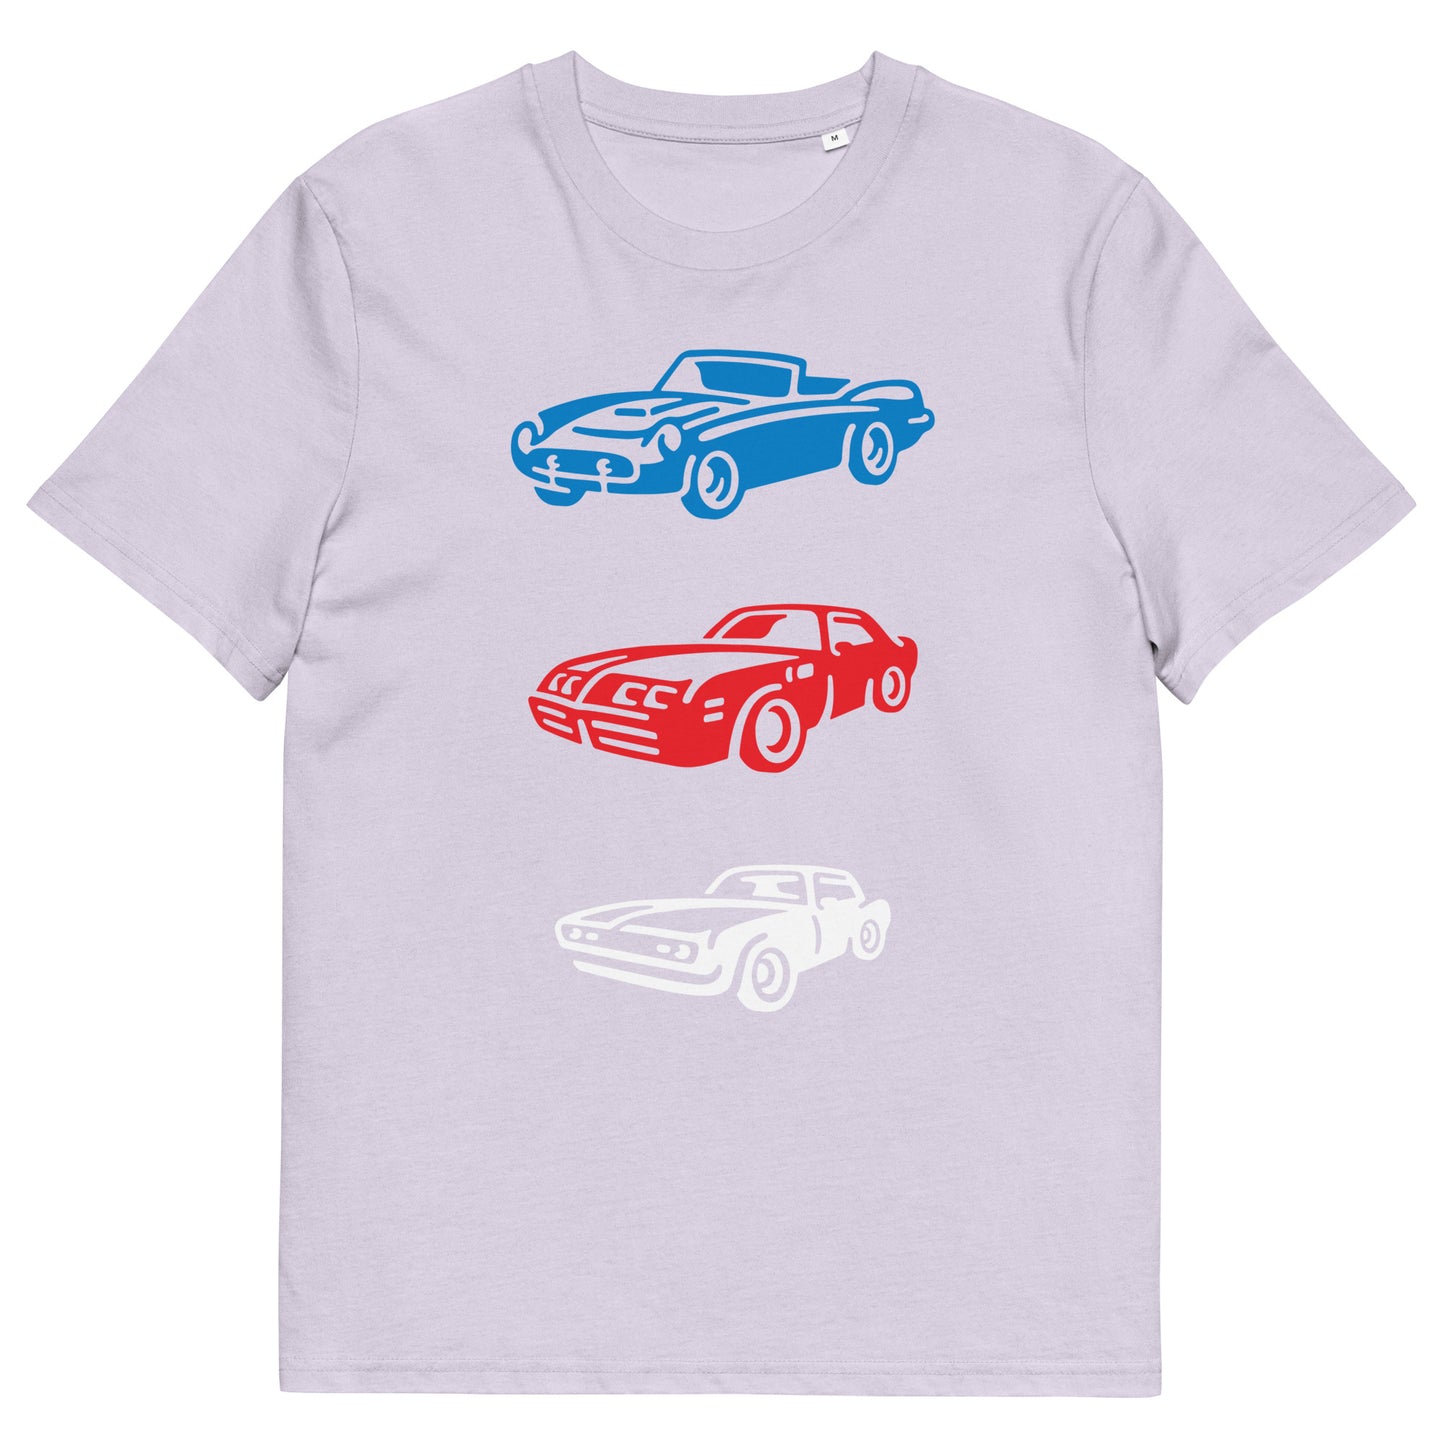 Unisex Red White and Blue Car Organic cotton t-shirt